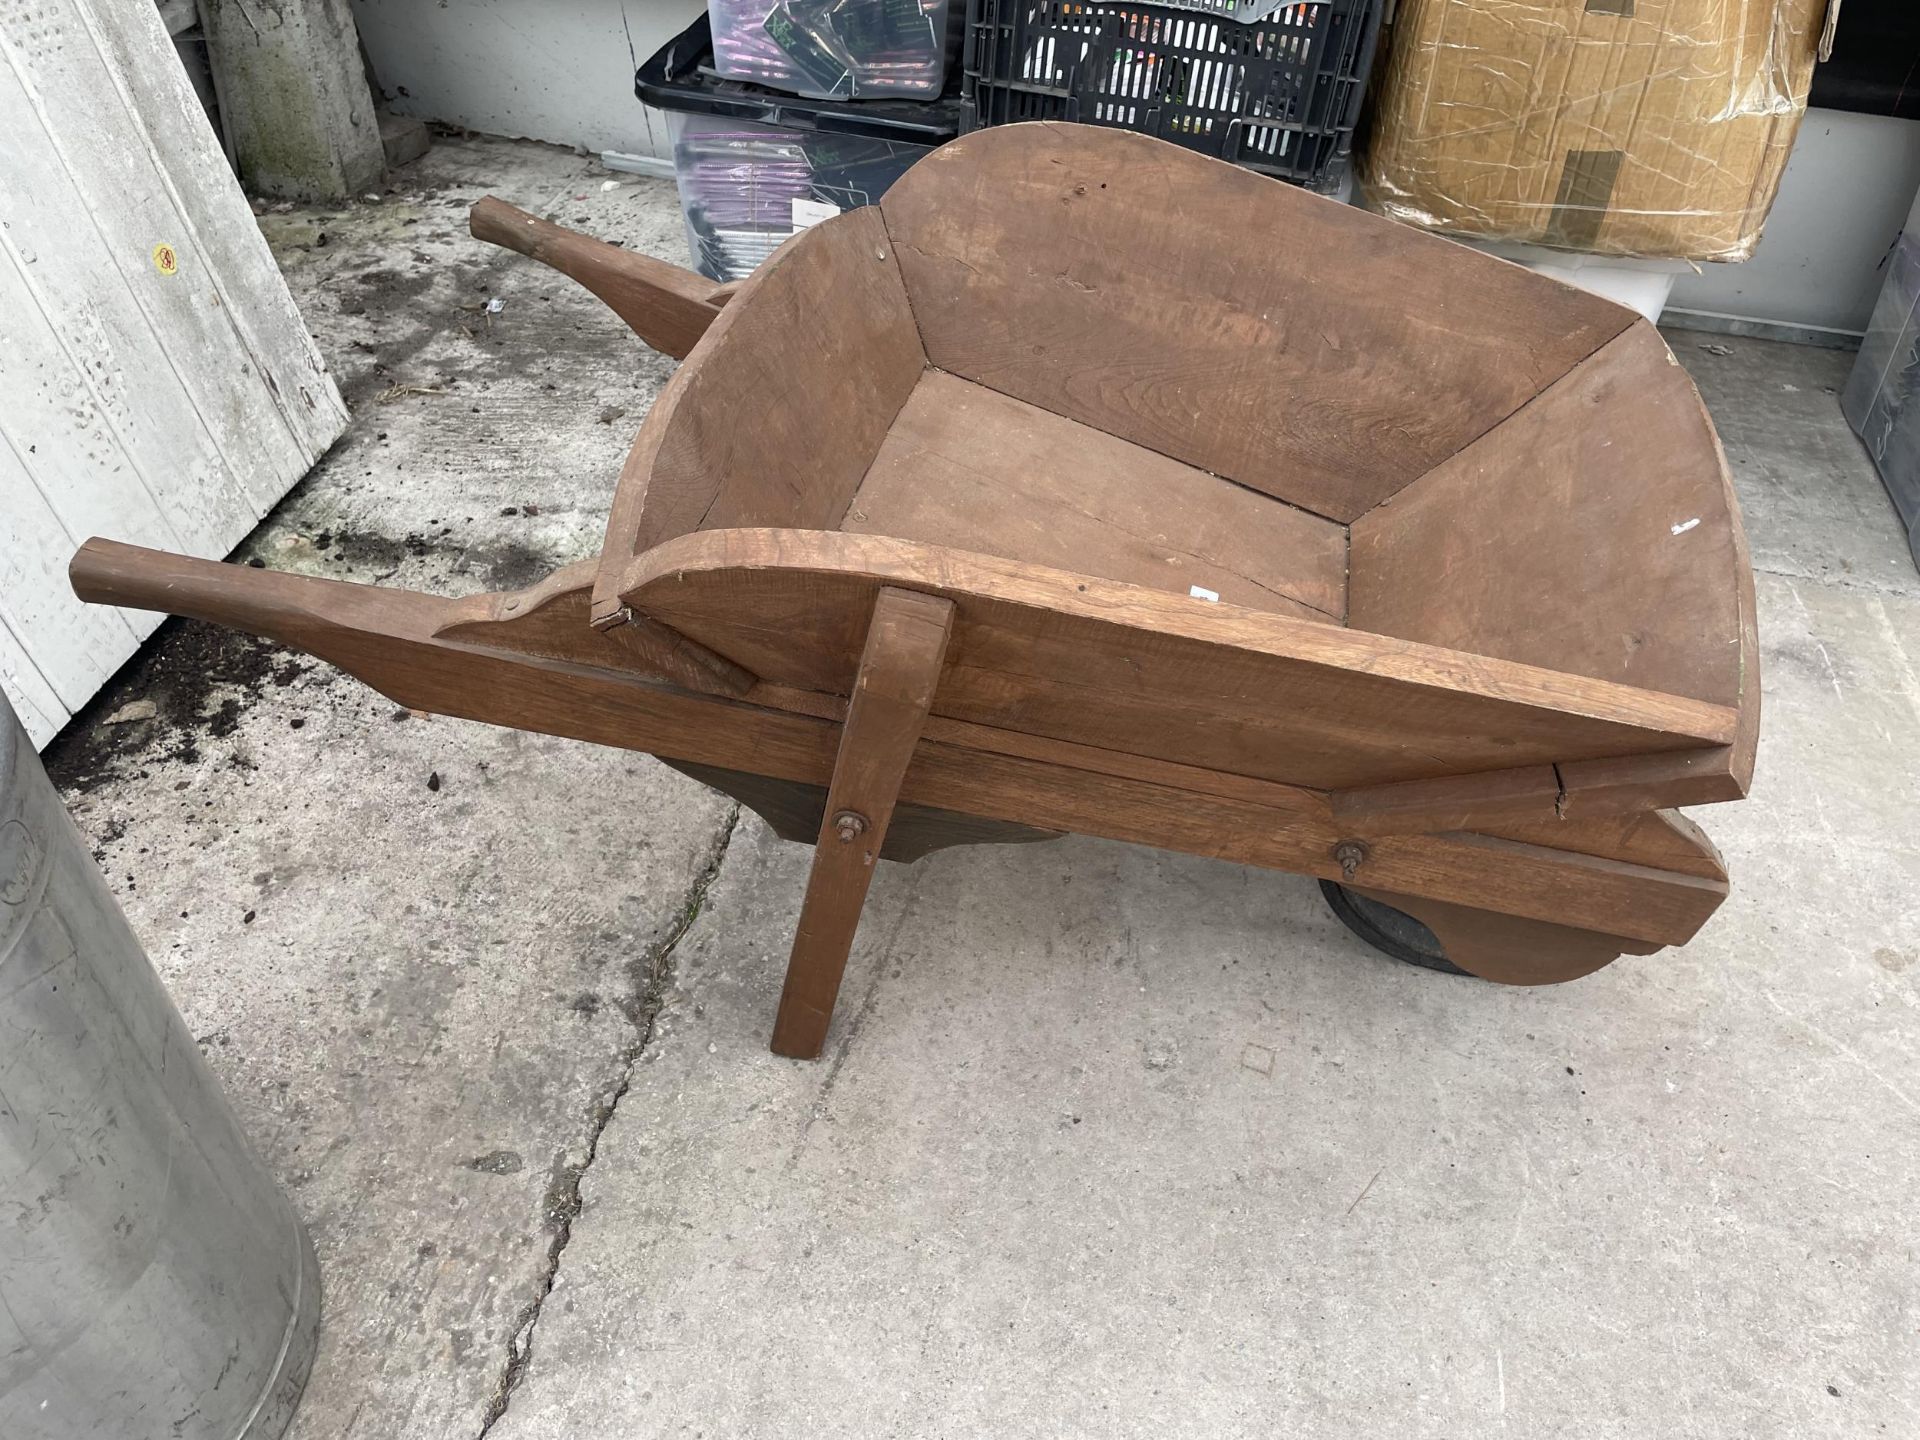 A WOODEN WHEEL BARROW PLANTER CREATED FROM YEW WOOD